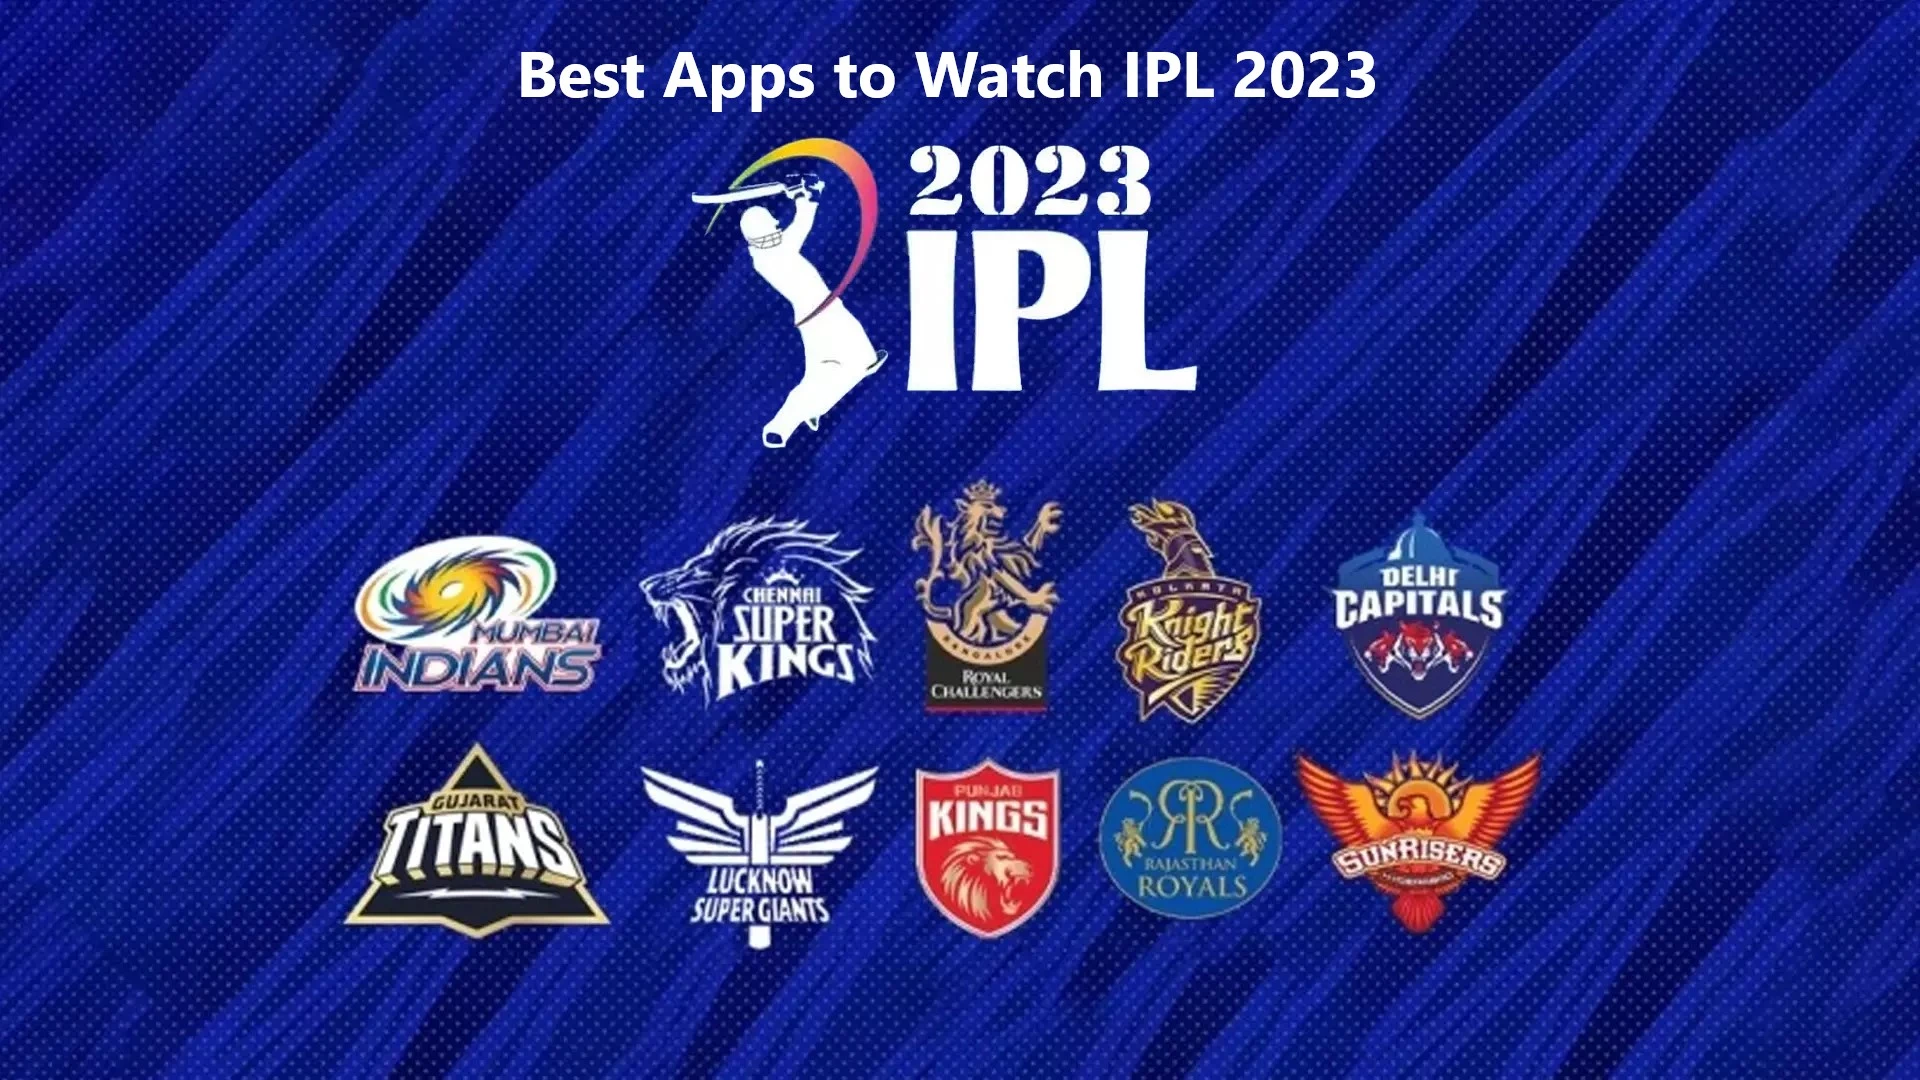 Best Apps to Watch IPL 2023: List of Best Apps to Watch Live IPL 2023 Match in India, USA, and Other Countries|